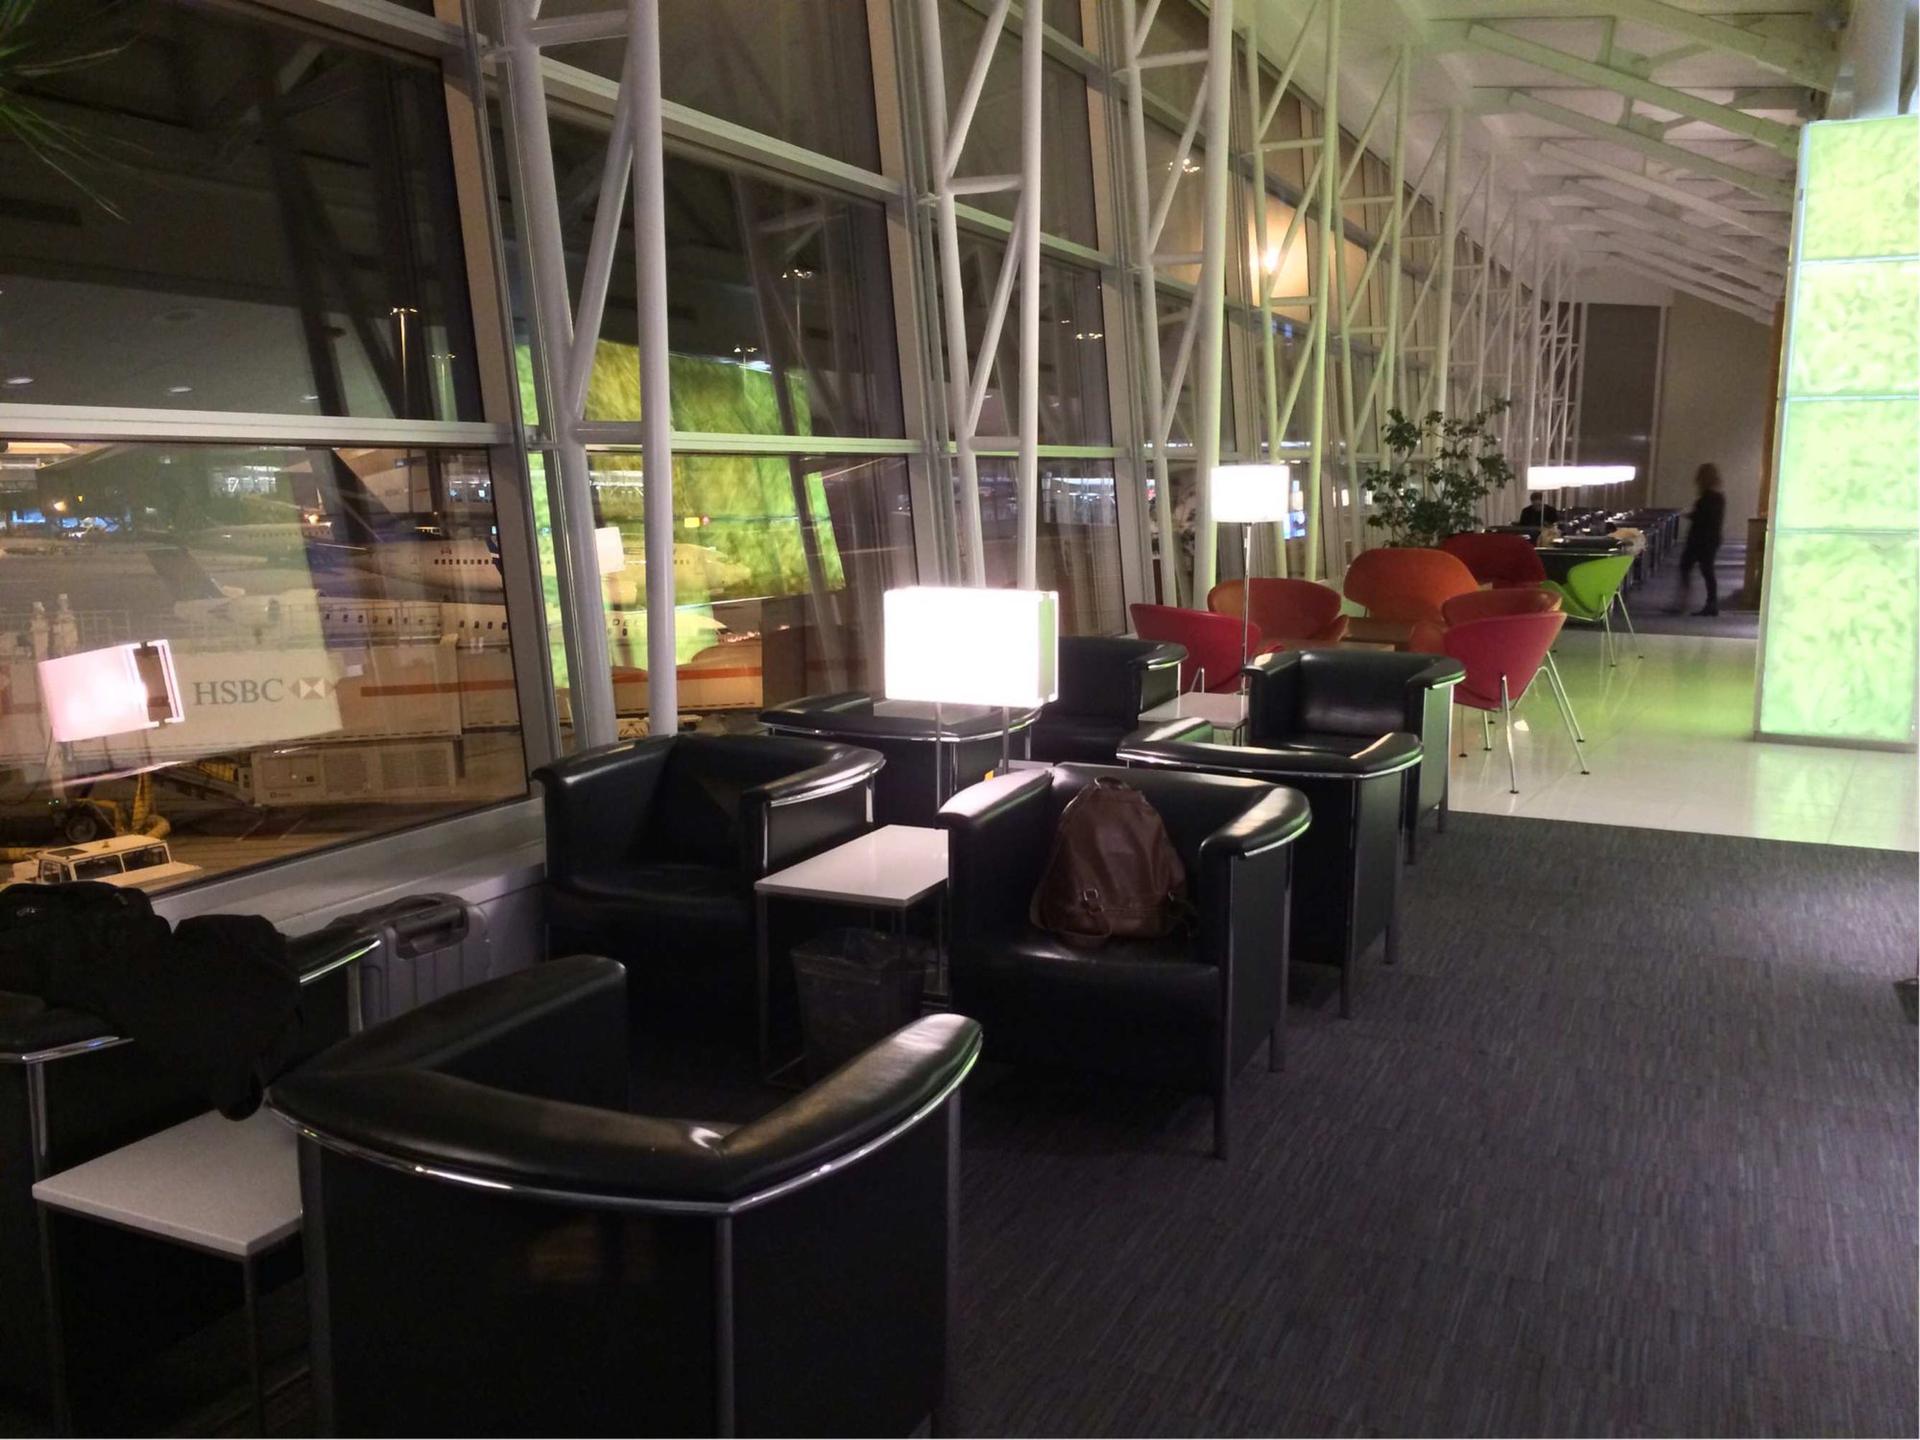 Air Canada Maple Leaf Lounge image 4 of 12